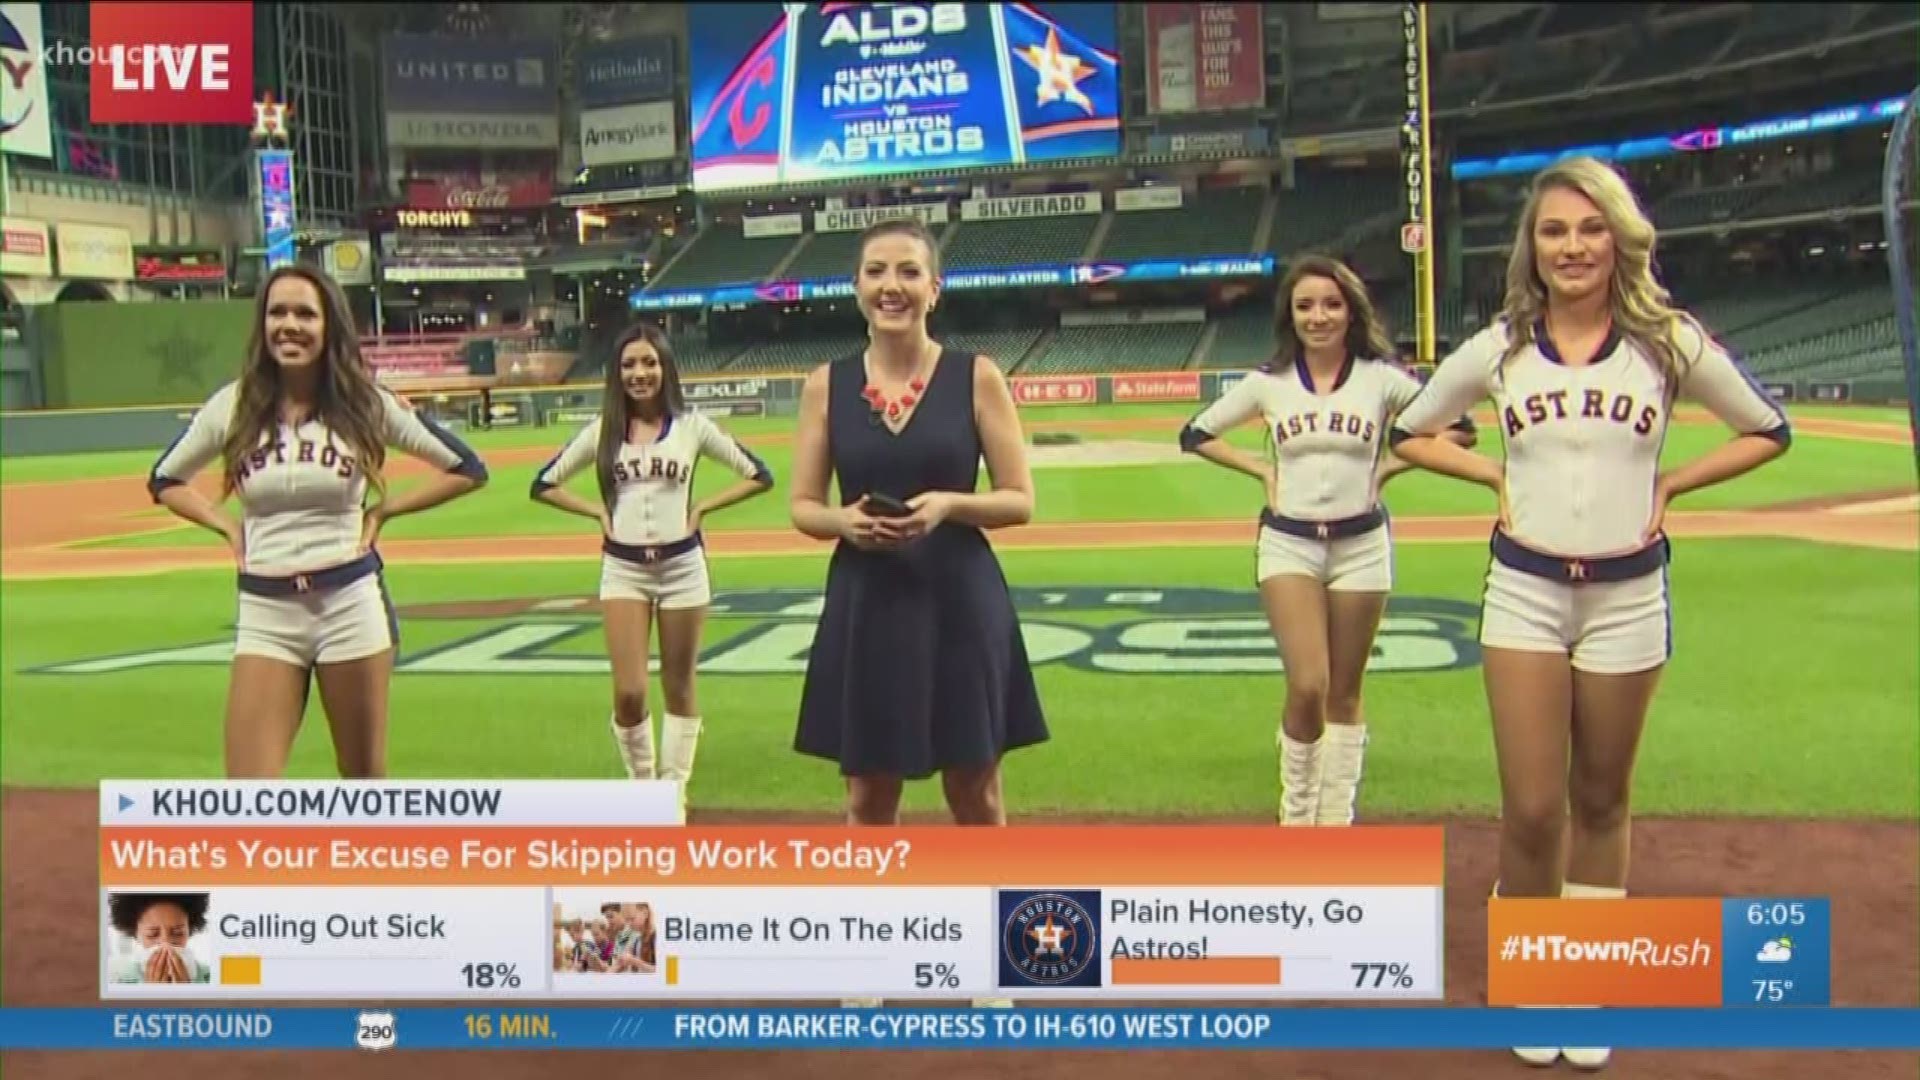 Brandi Smith was out at Minute Maid Park ahead of Game 1 of the ALDS and the Shooting Stars tried to teach her a few dance moves Friday morning.